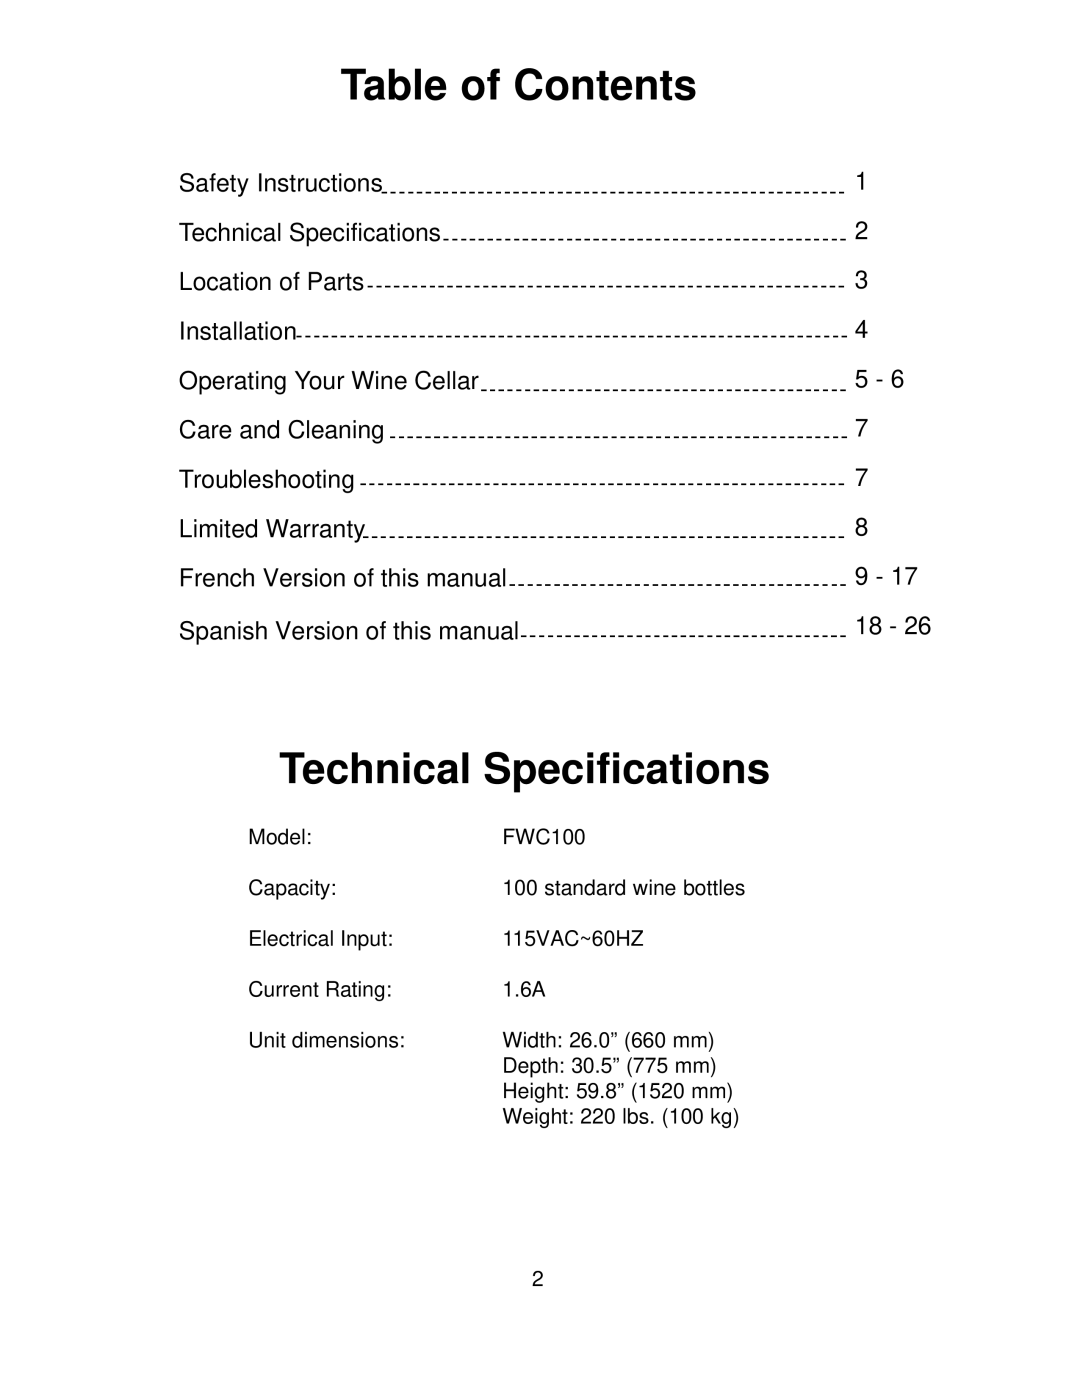 Franklin Industries, L.L.C FCW100 manual Table of Contents, Technical Specifications 